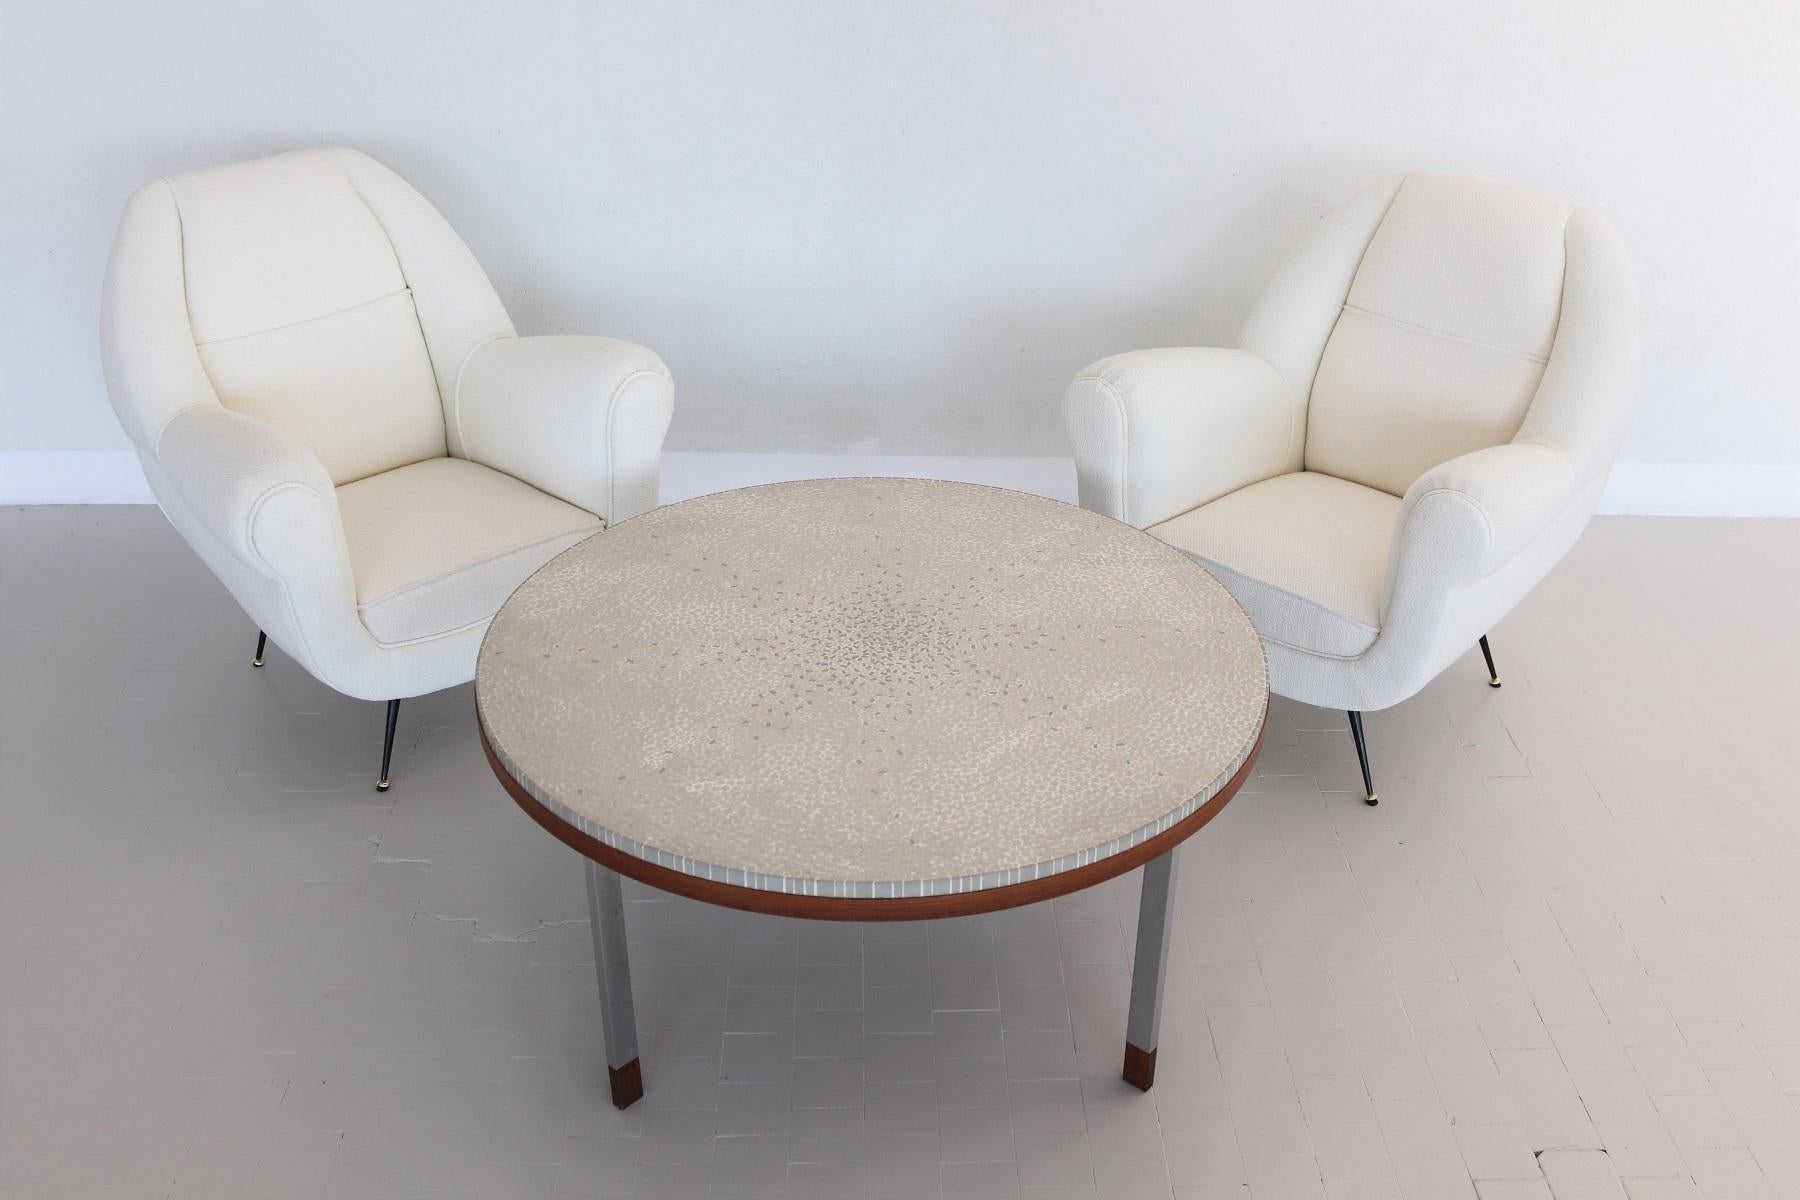 German Midcentury Mosaic Tile and Teak Coffee Table by Berthold Müller, 1960s For Sale